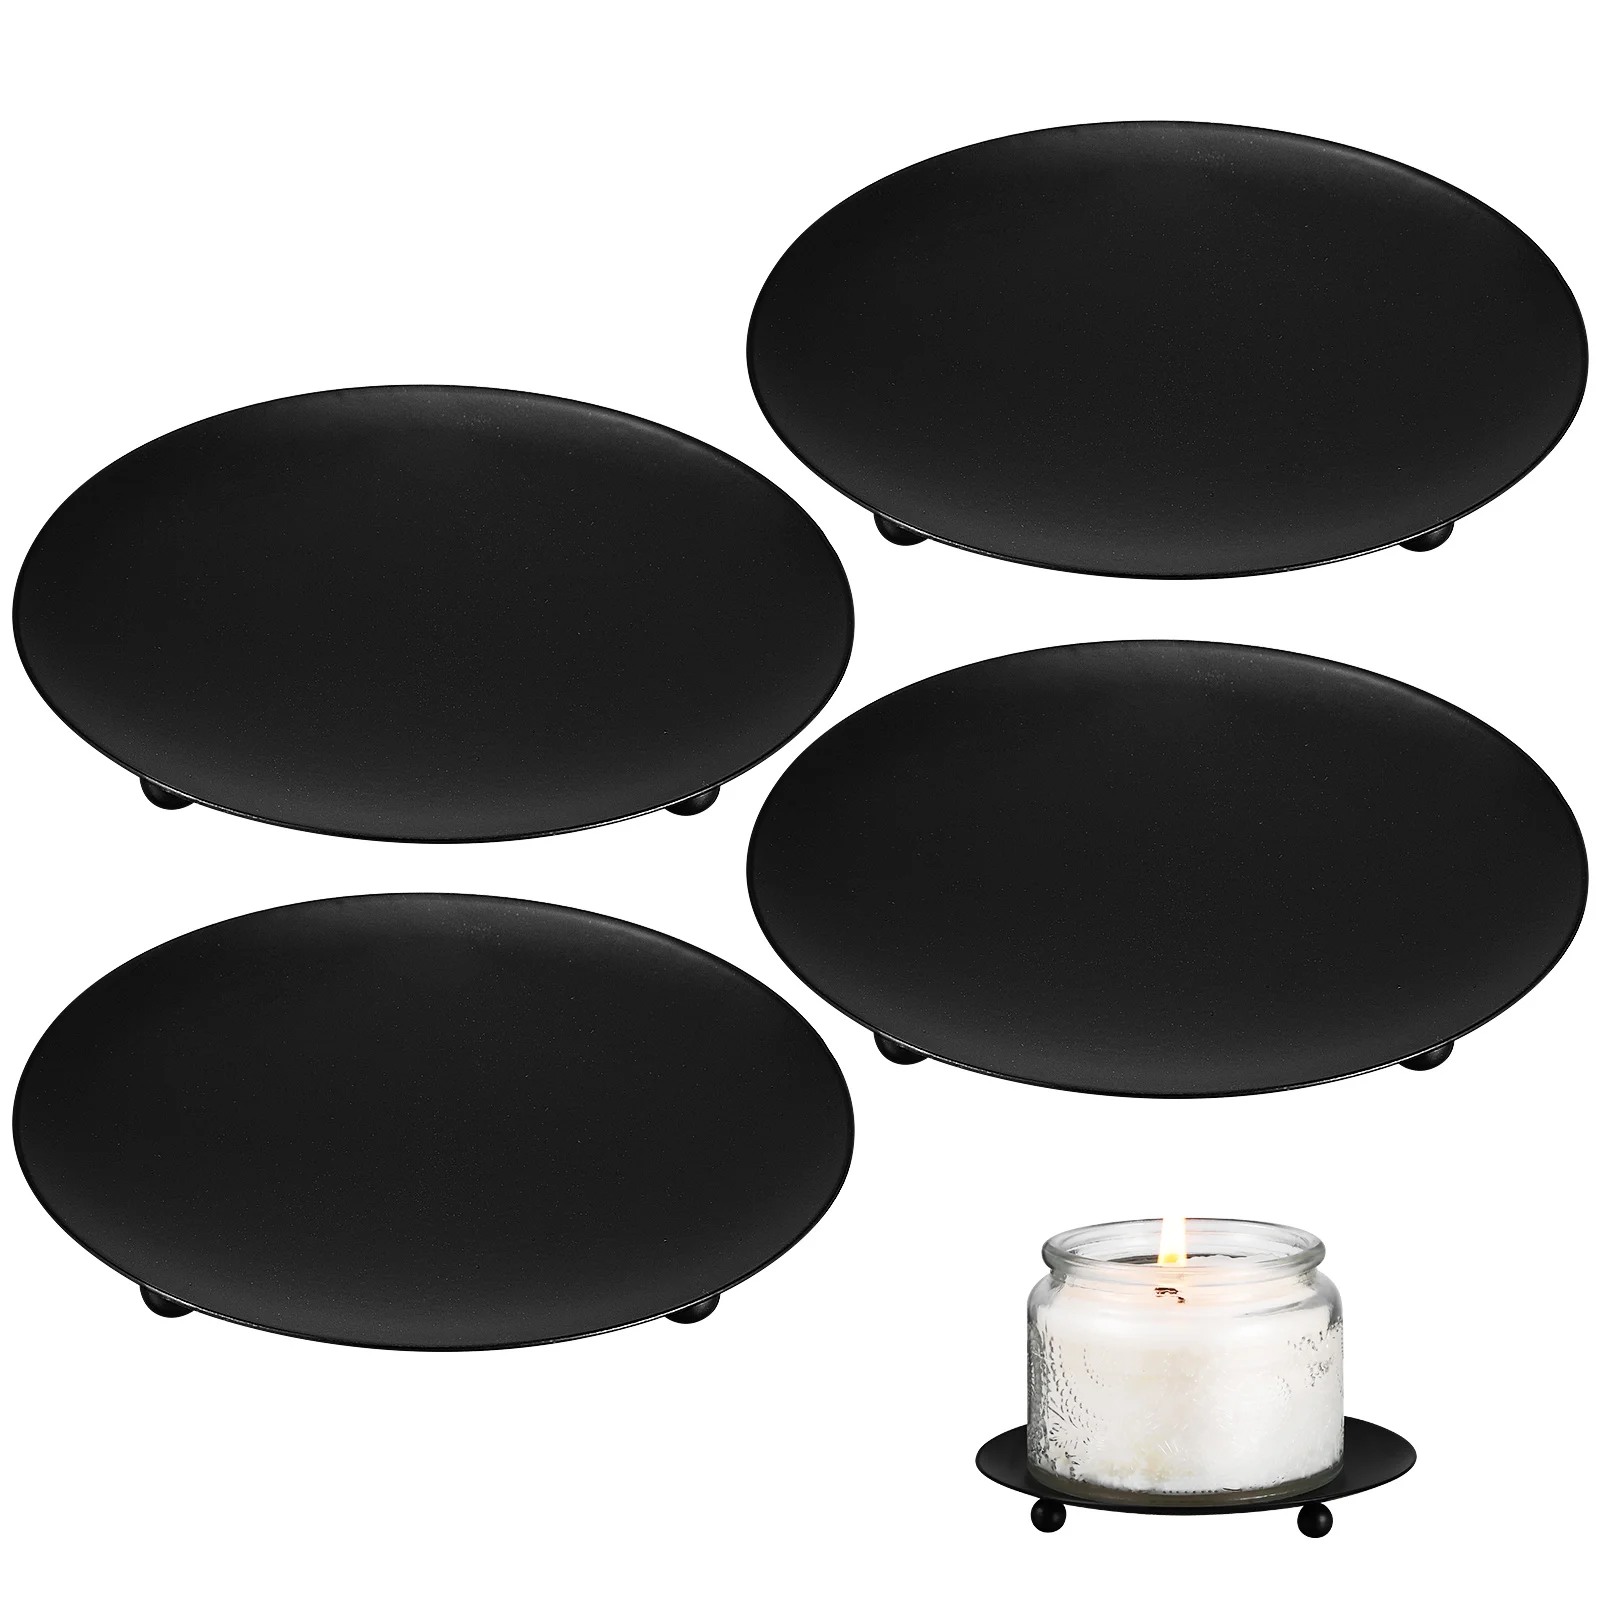 

4 Pcs Holder Tray Plate Stands Tapered Candles Dish For Pillar Black Holders Candlestick Decor Table Centerpiece